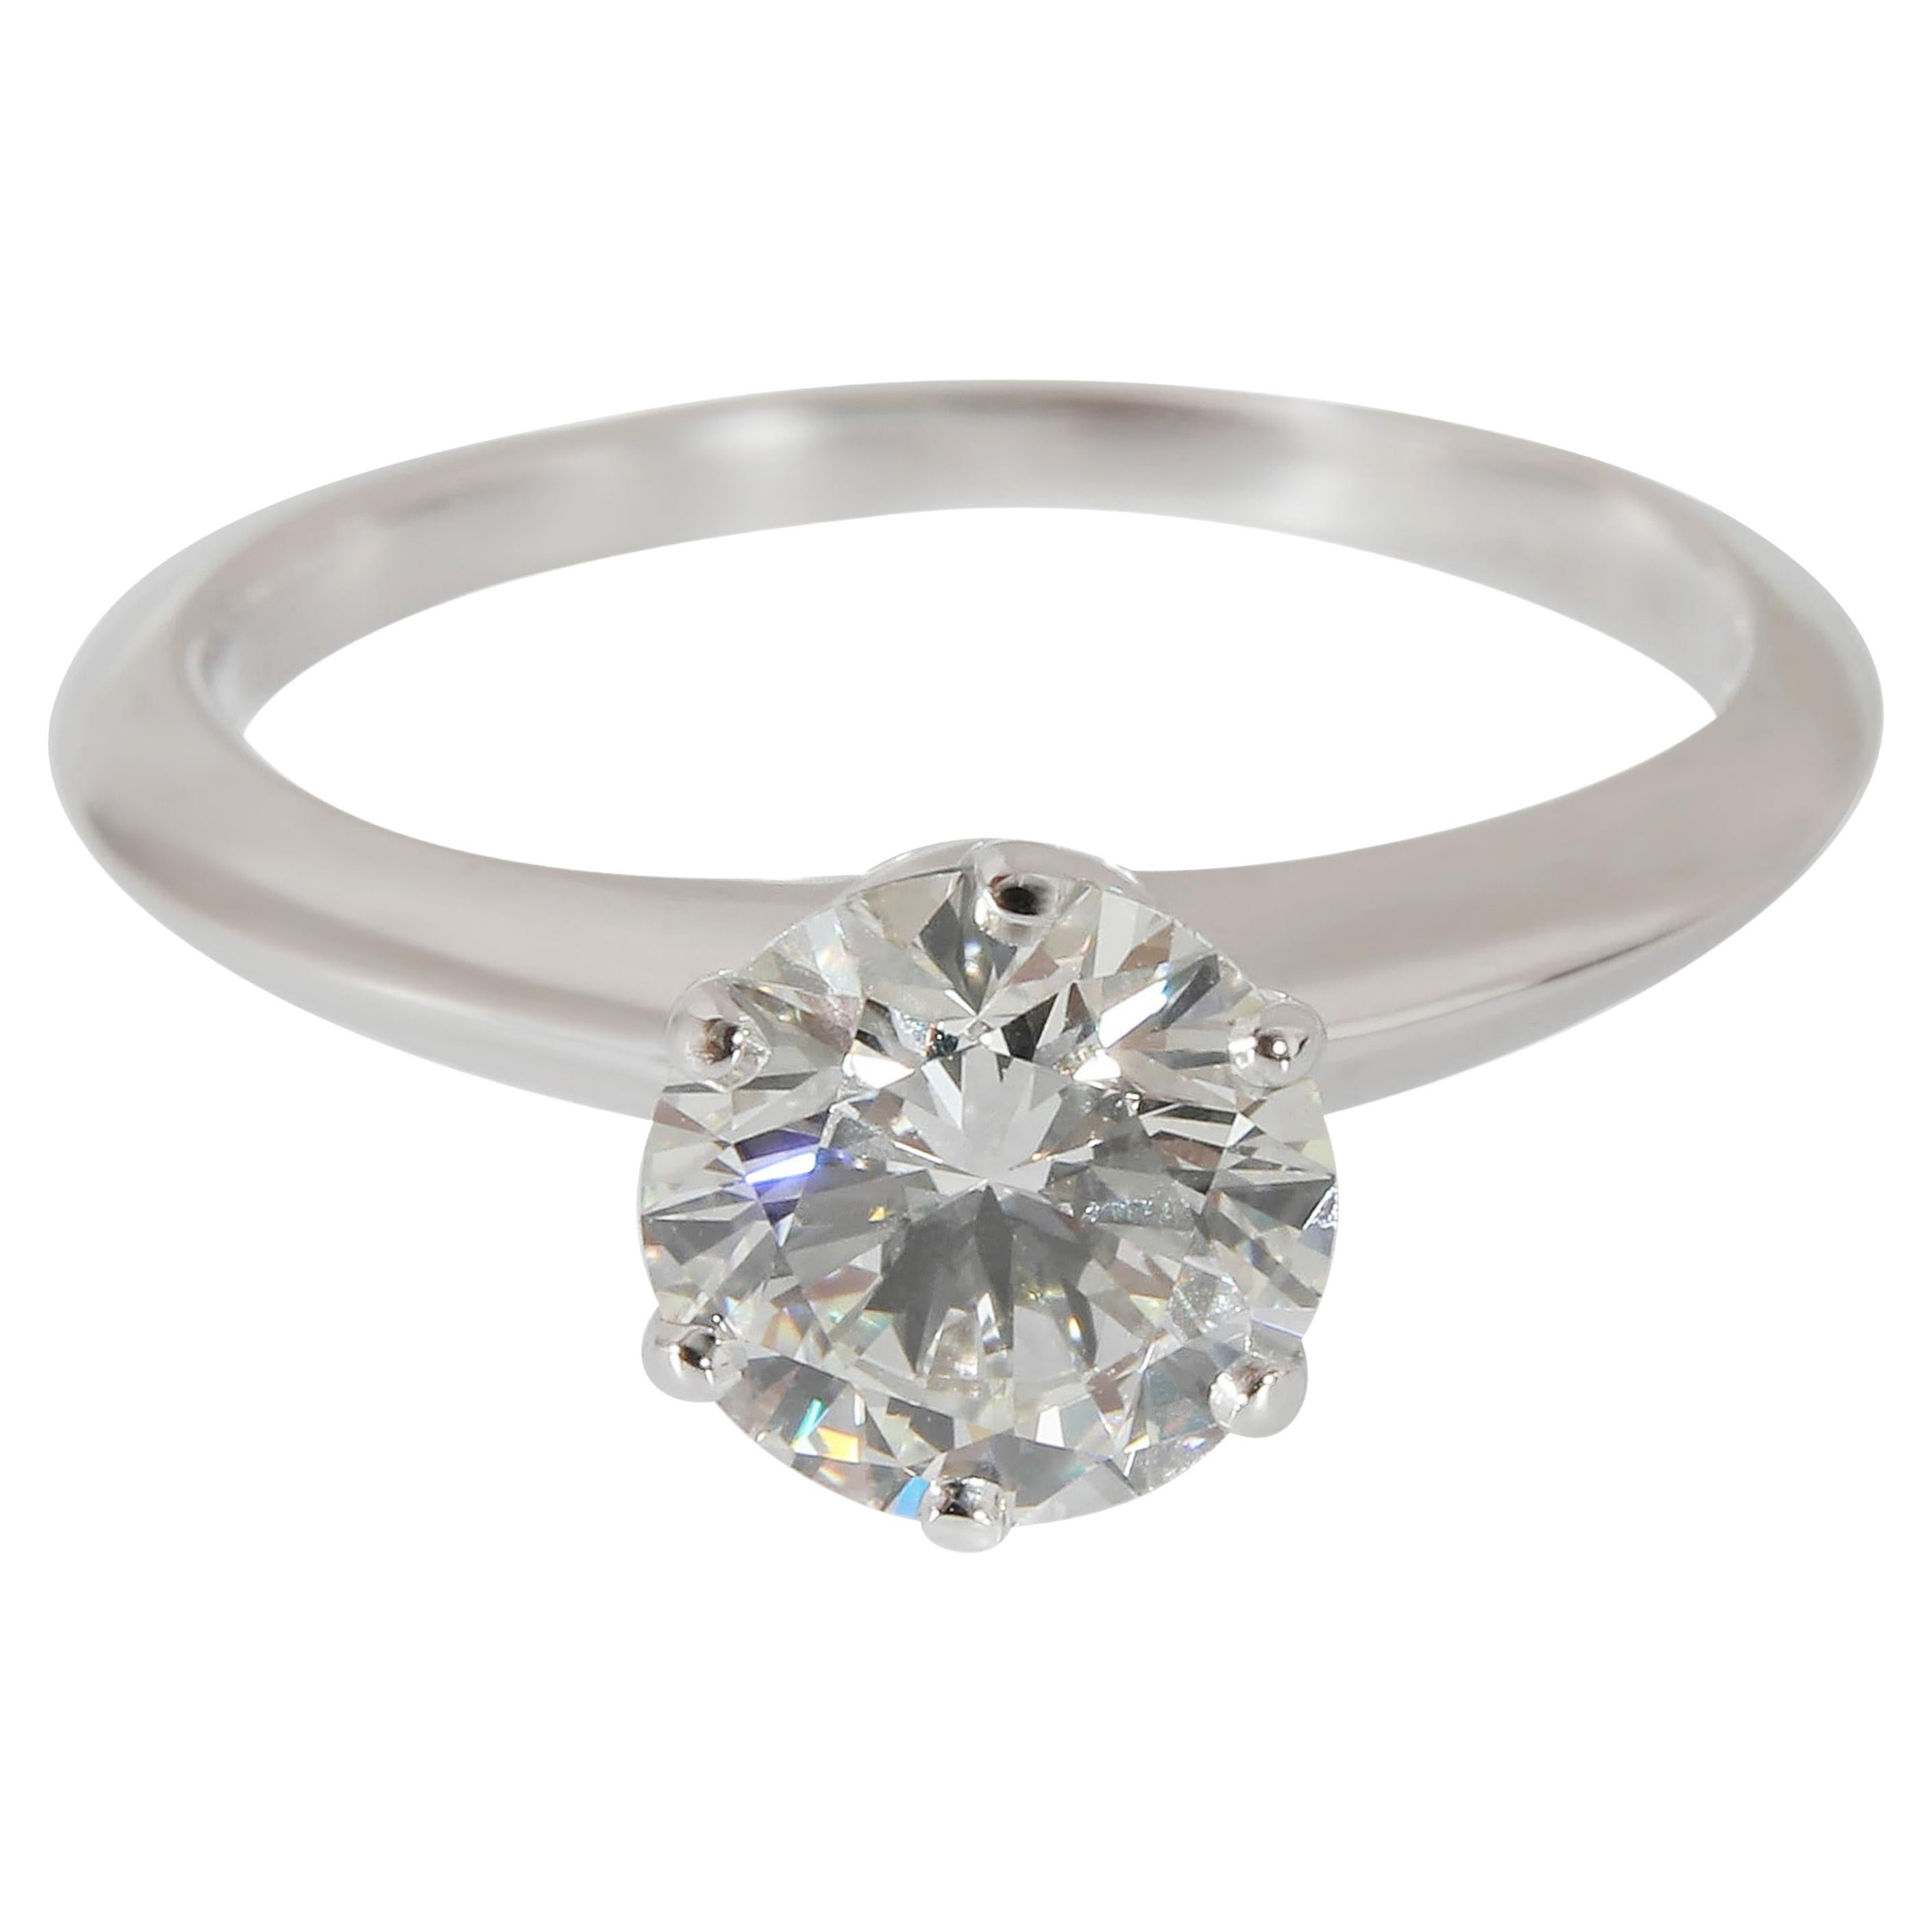 Tiffany & Co. Diamond Engagement Ring in Platinum I VVS2 1.29 CTW For Sale